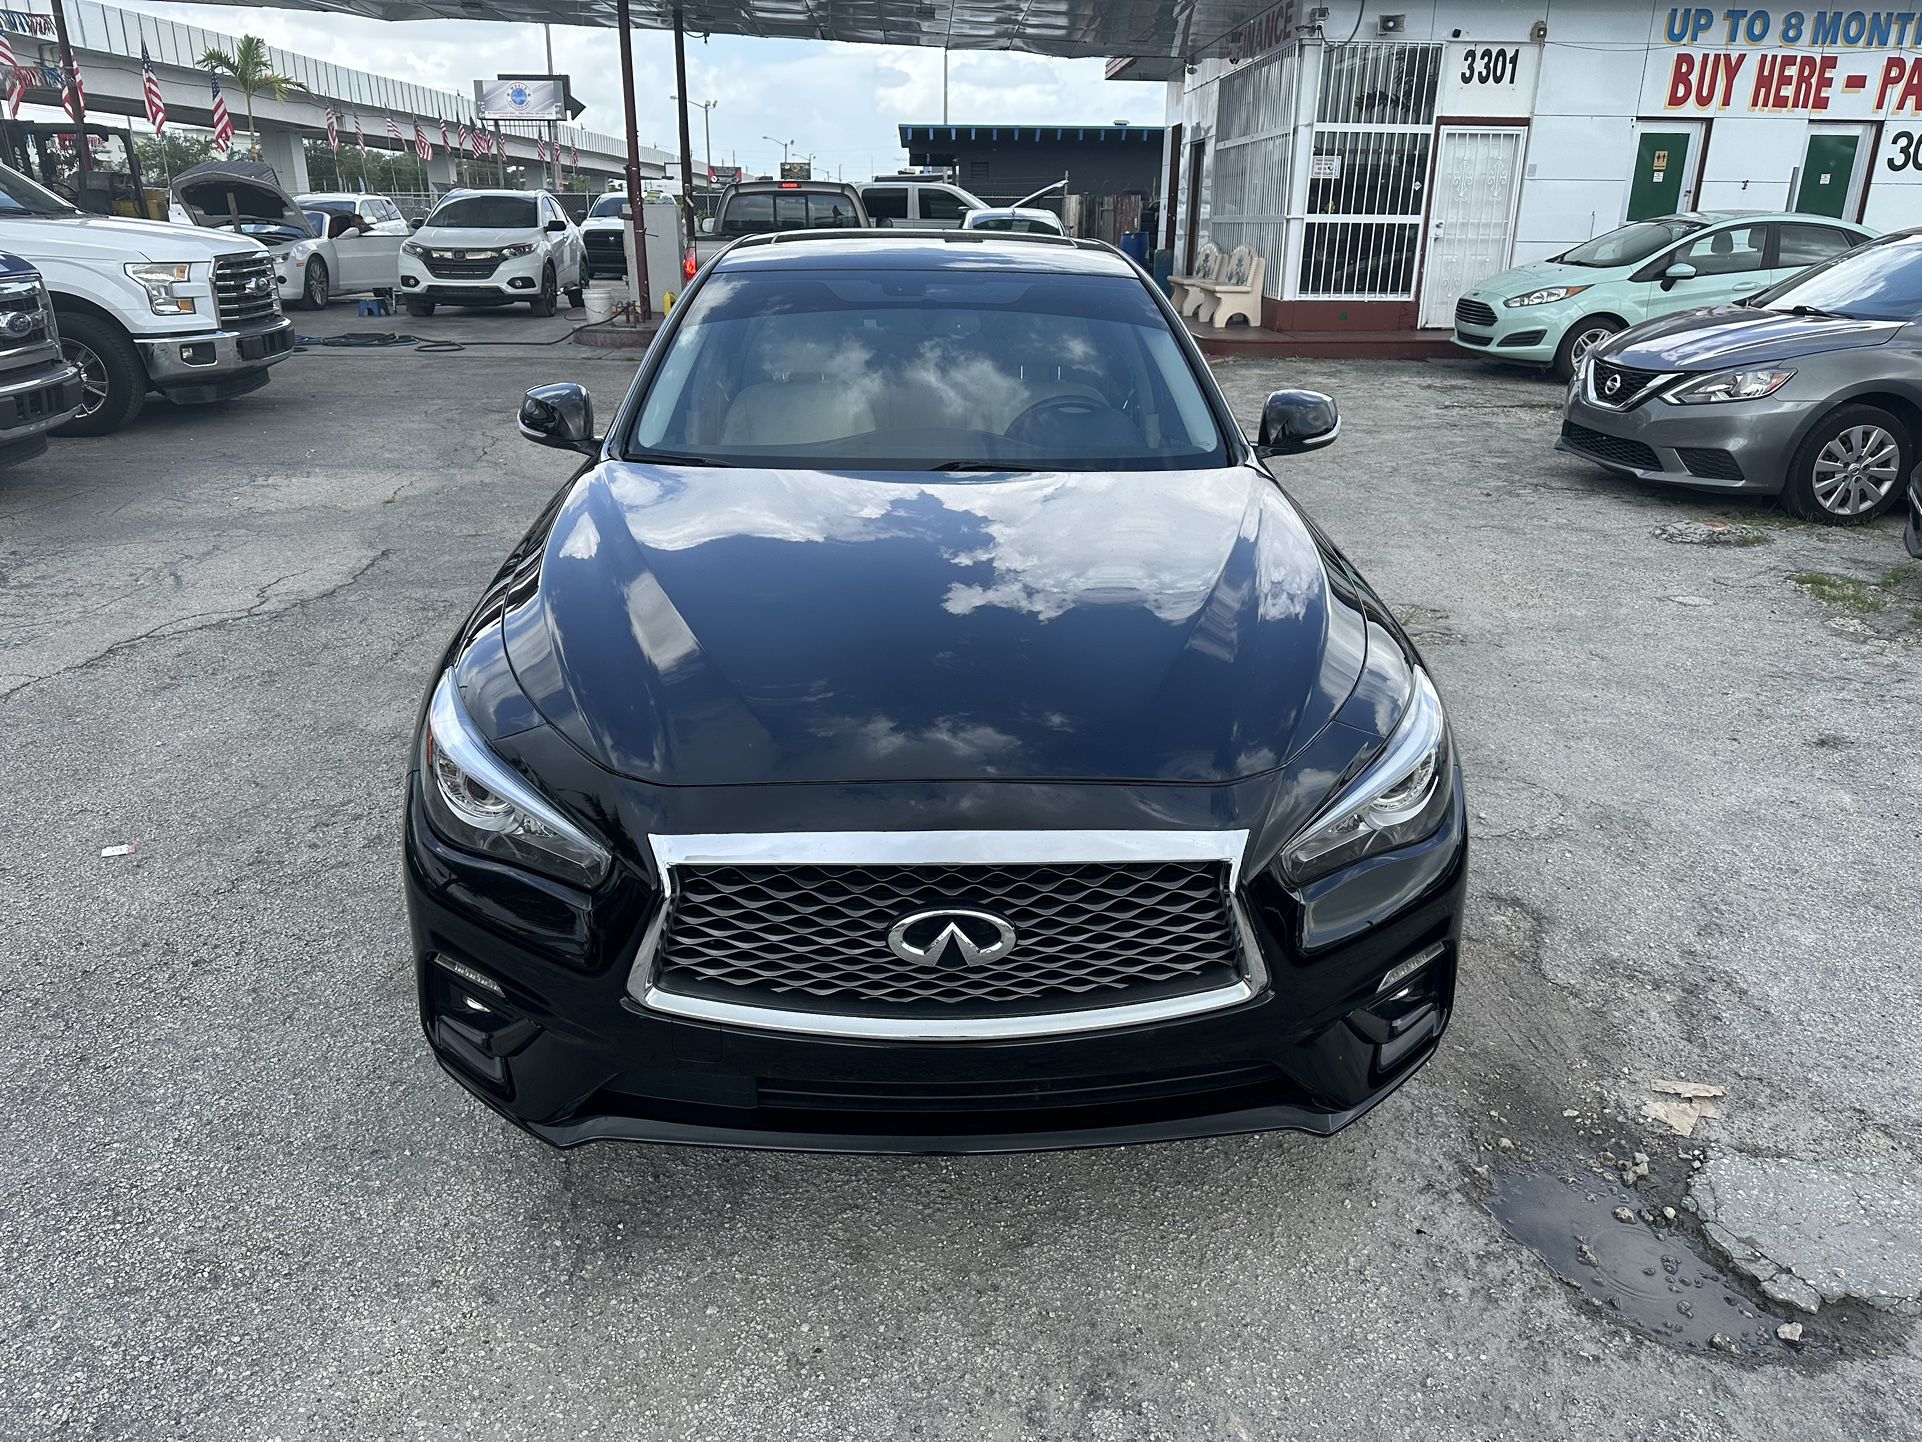 used 2019 infiniti q50 - front view 1